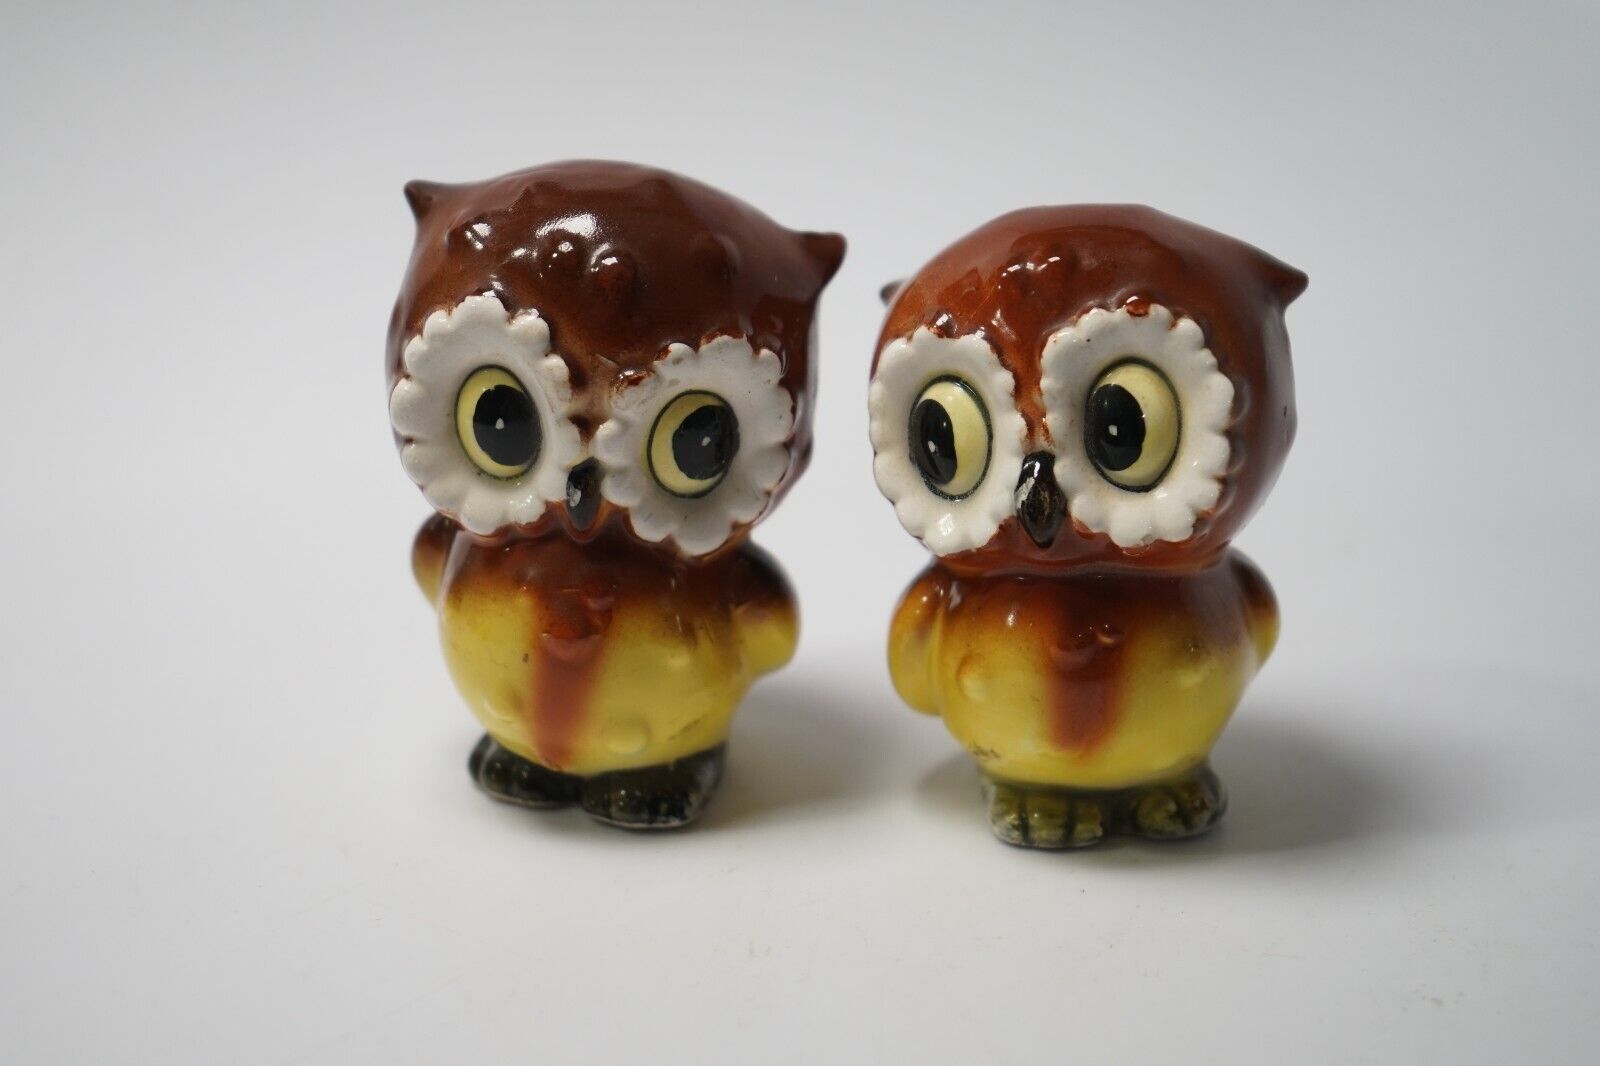 VTG Norcrest Owl Salt and Pepper Shakers Made in Japan ADORABLE Cute Cottagecore